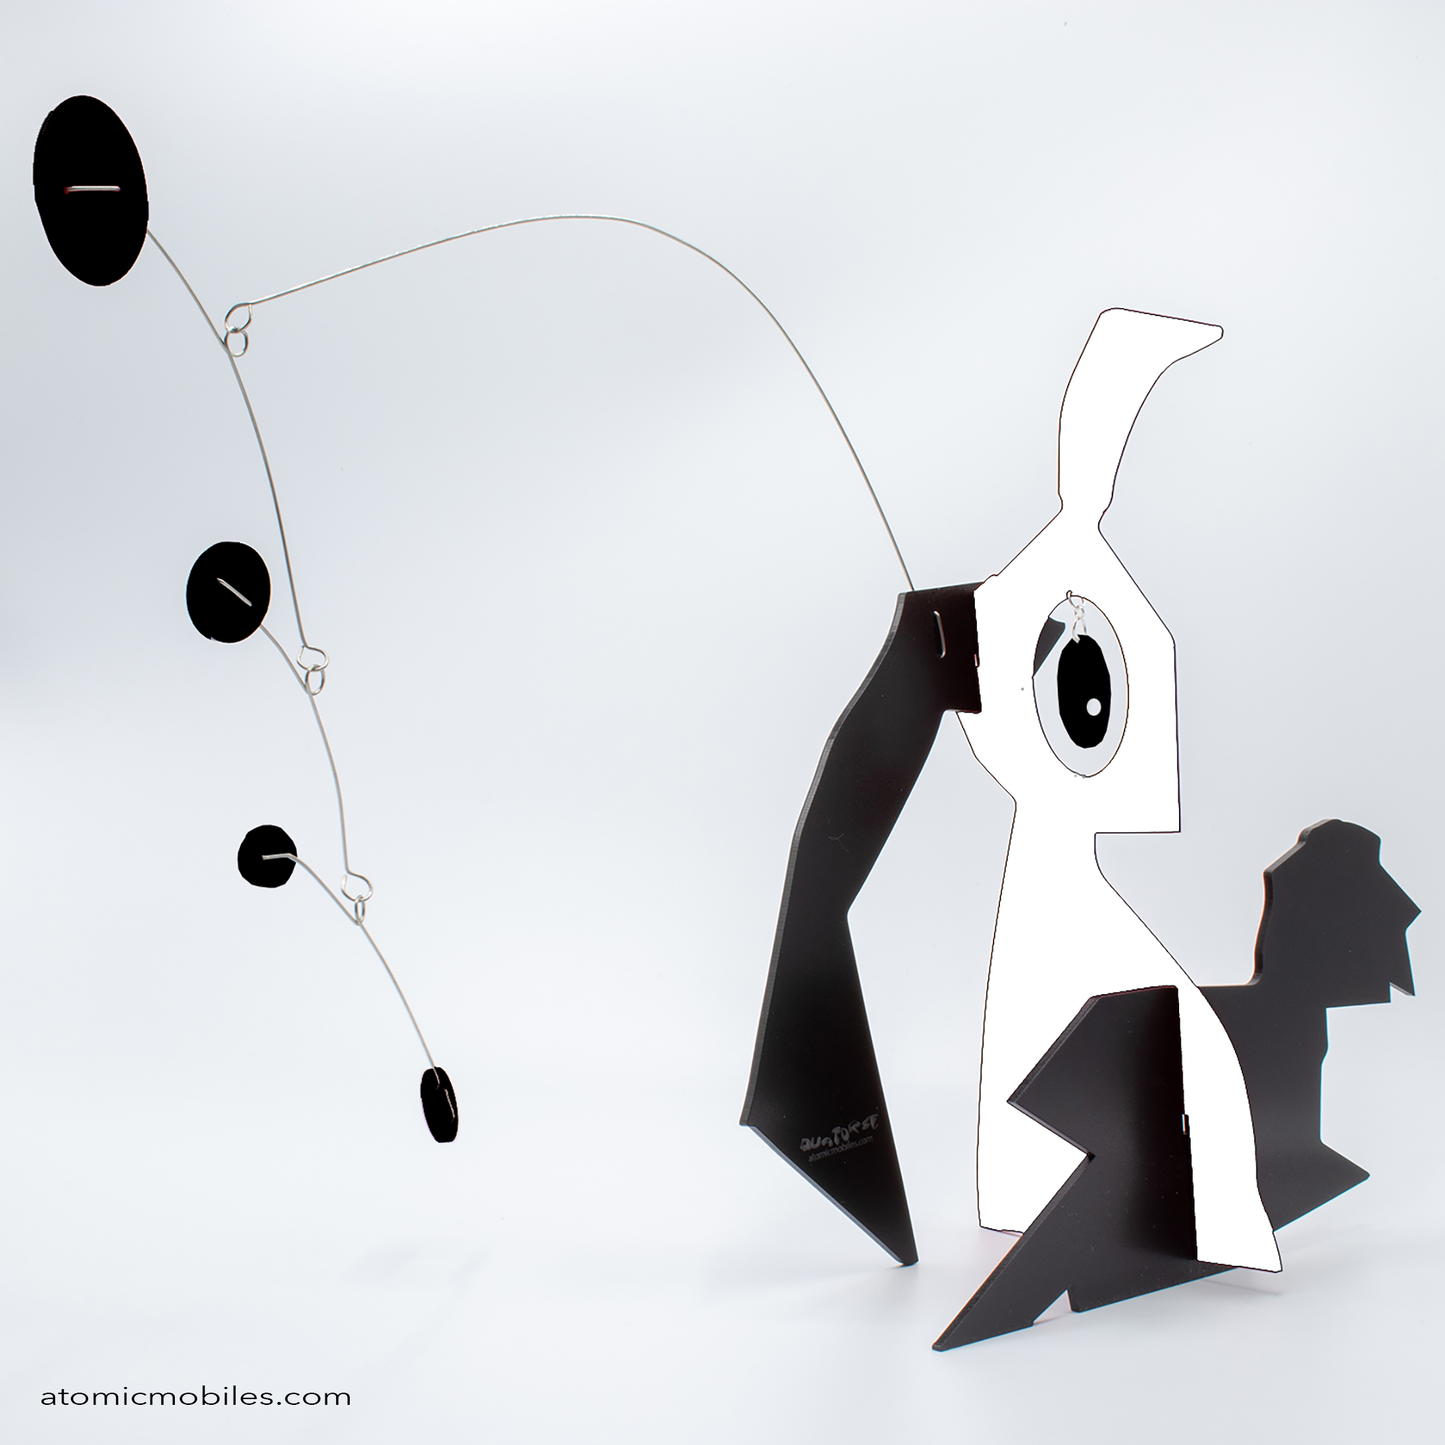 KinetiCats Collection Rabbit in White and Black - one of 12 Modern Cute Abstract Animal Art Sculpture Kinetic Stabiles inspired by Dada and mid century modern style art by AtomicMobiles.com